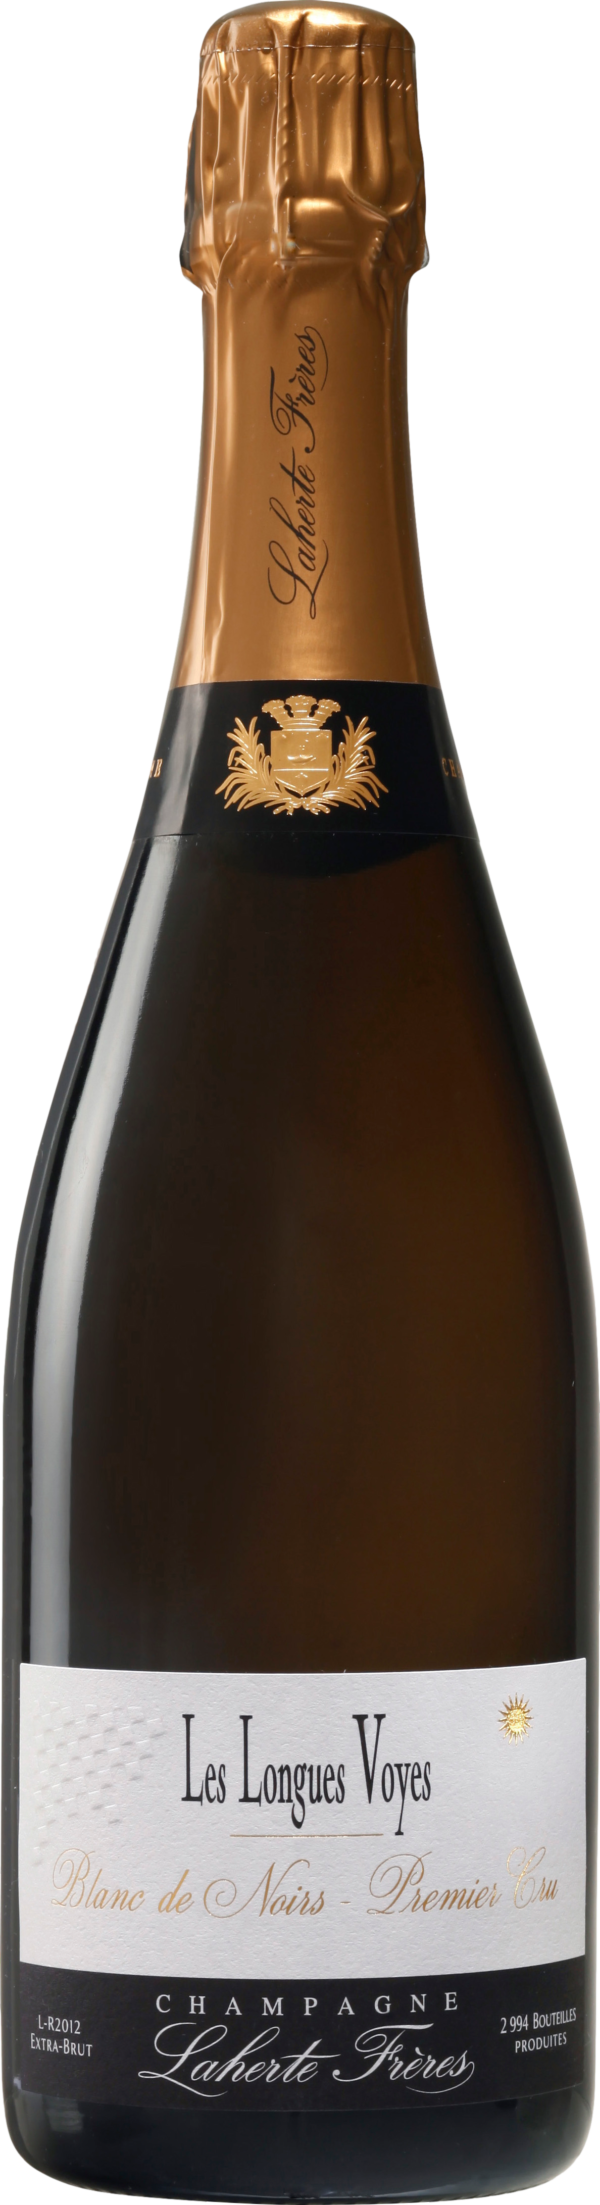 Product image of Champagne Laherte Freres Les Longues Voyes Blanc de Noirs 2018 from 8wines